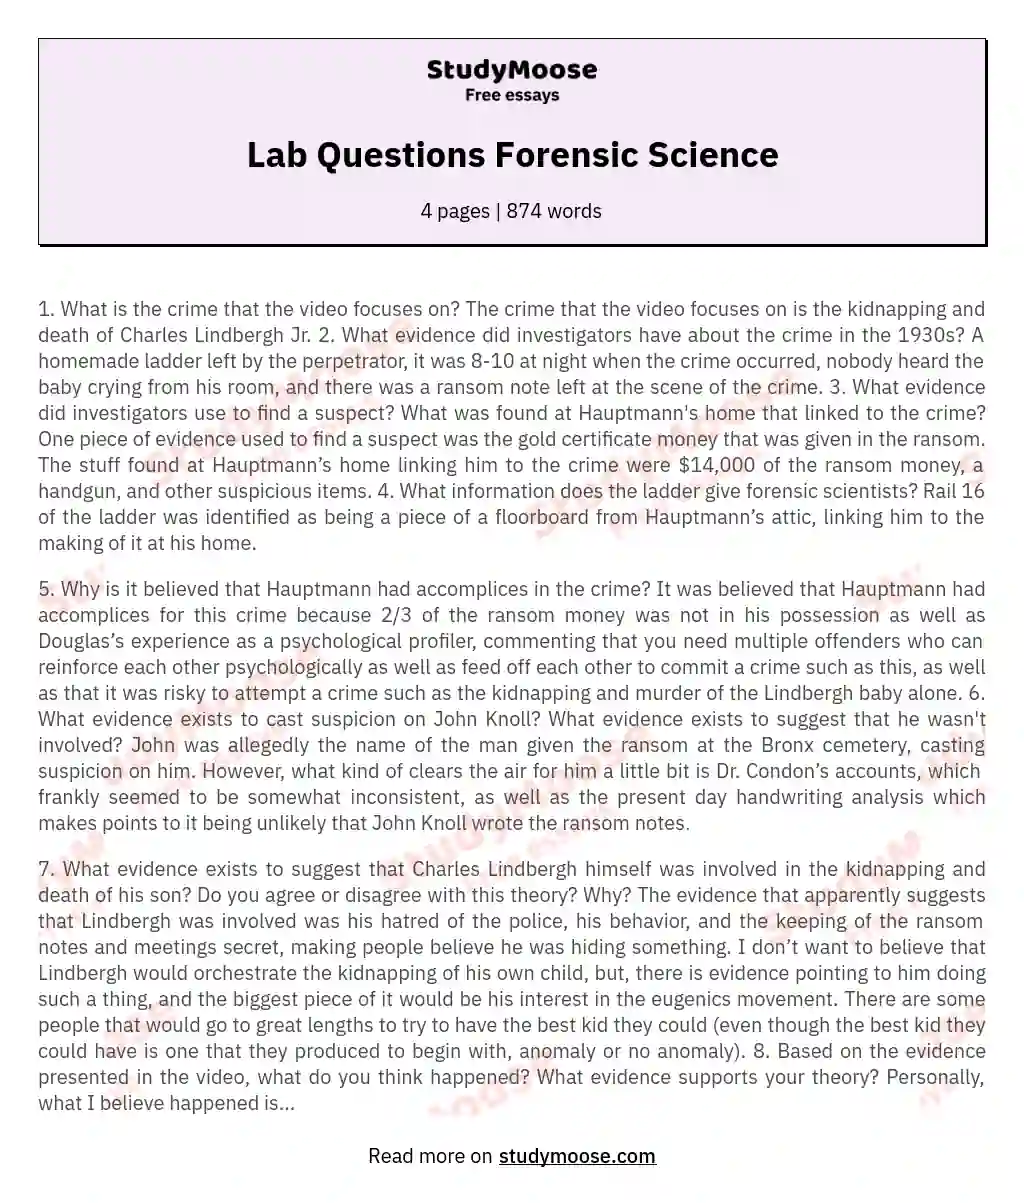 Lab Questions Forensic Science